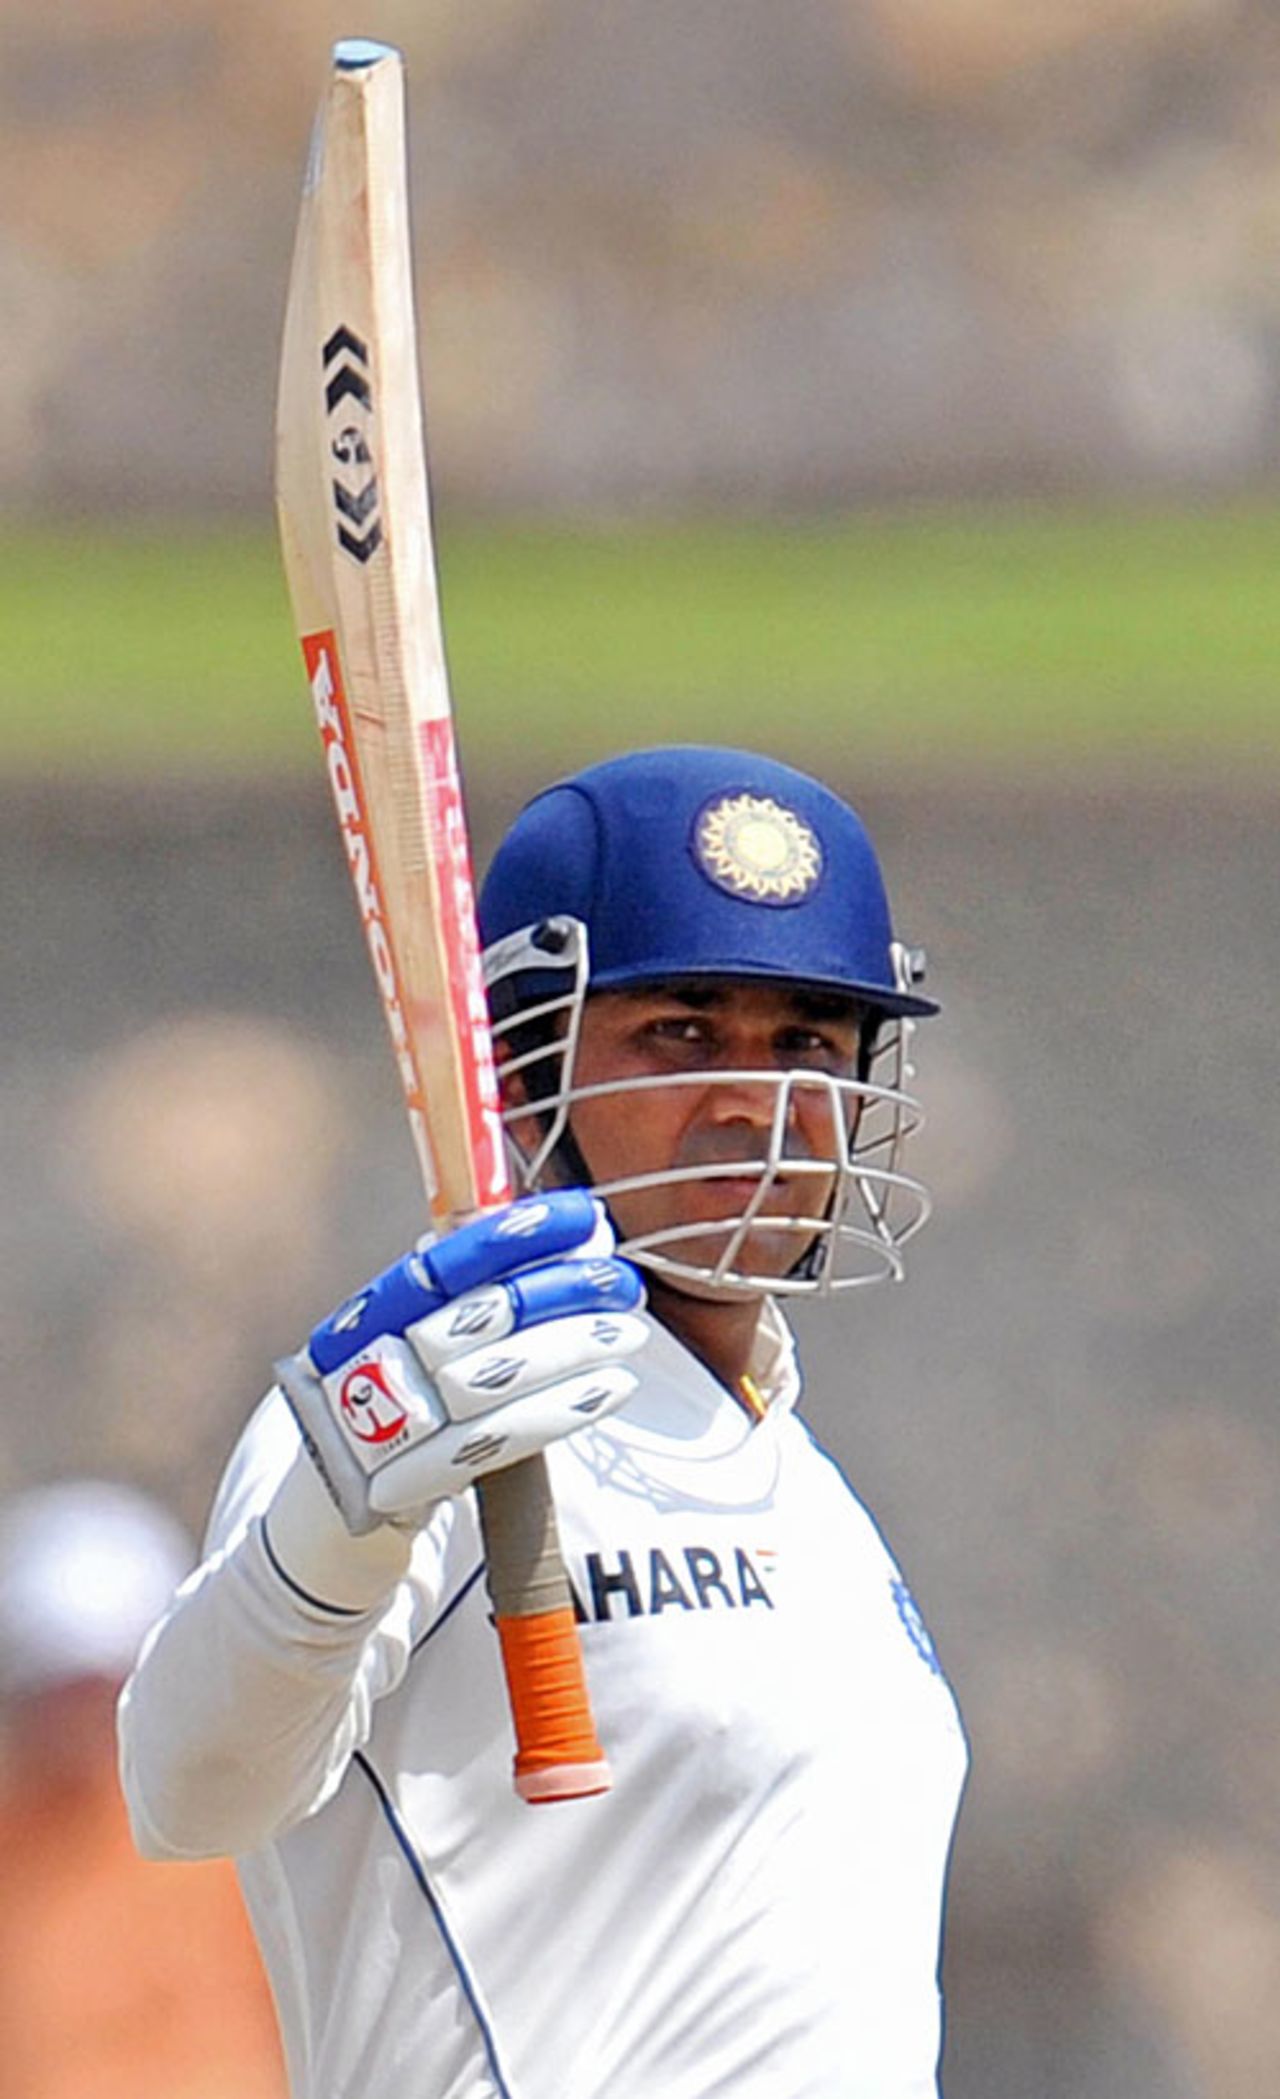 Virender Sehwag raises the bat after reaching his fifty, Sri Lanka v India, 2nd Test, Galle, 3rd day, August 2, 2008